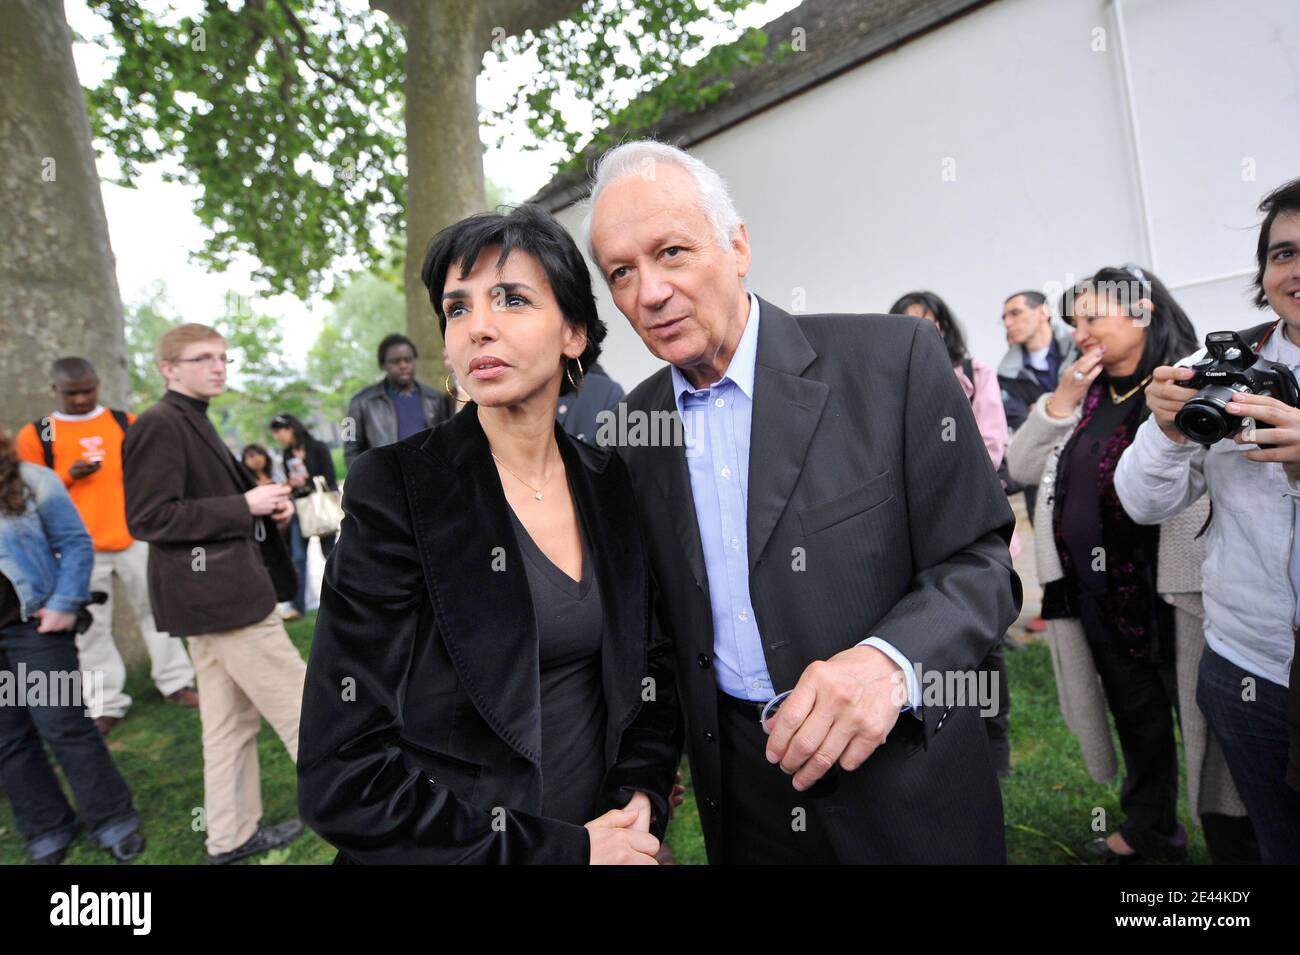 Michel Barnier, Rachida Dati and Jean-Marie Cavada attending a 'European  Picnic' with young militants at Bercy Village park in Paris, France on May  9, 2009. Photo by Mousse/ABACAPRESS.COM Stock Photo - Alamy